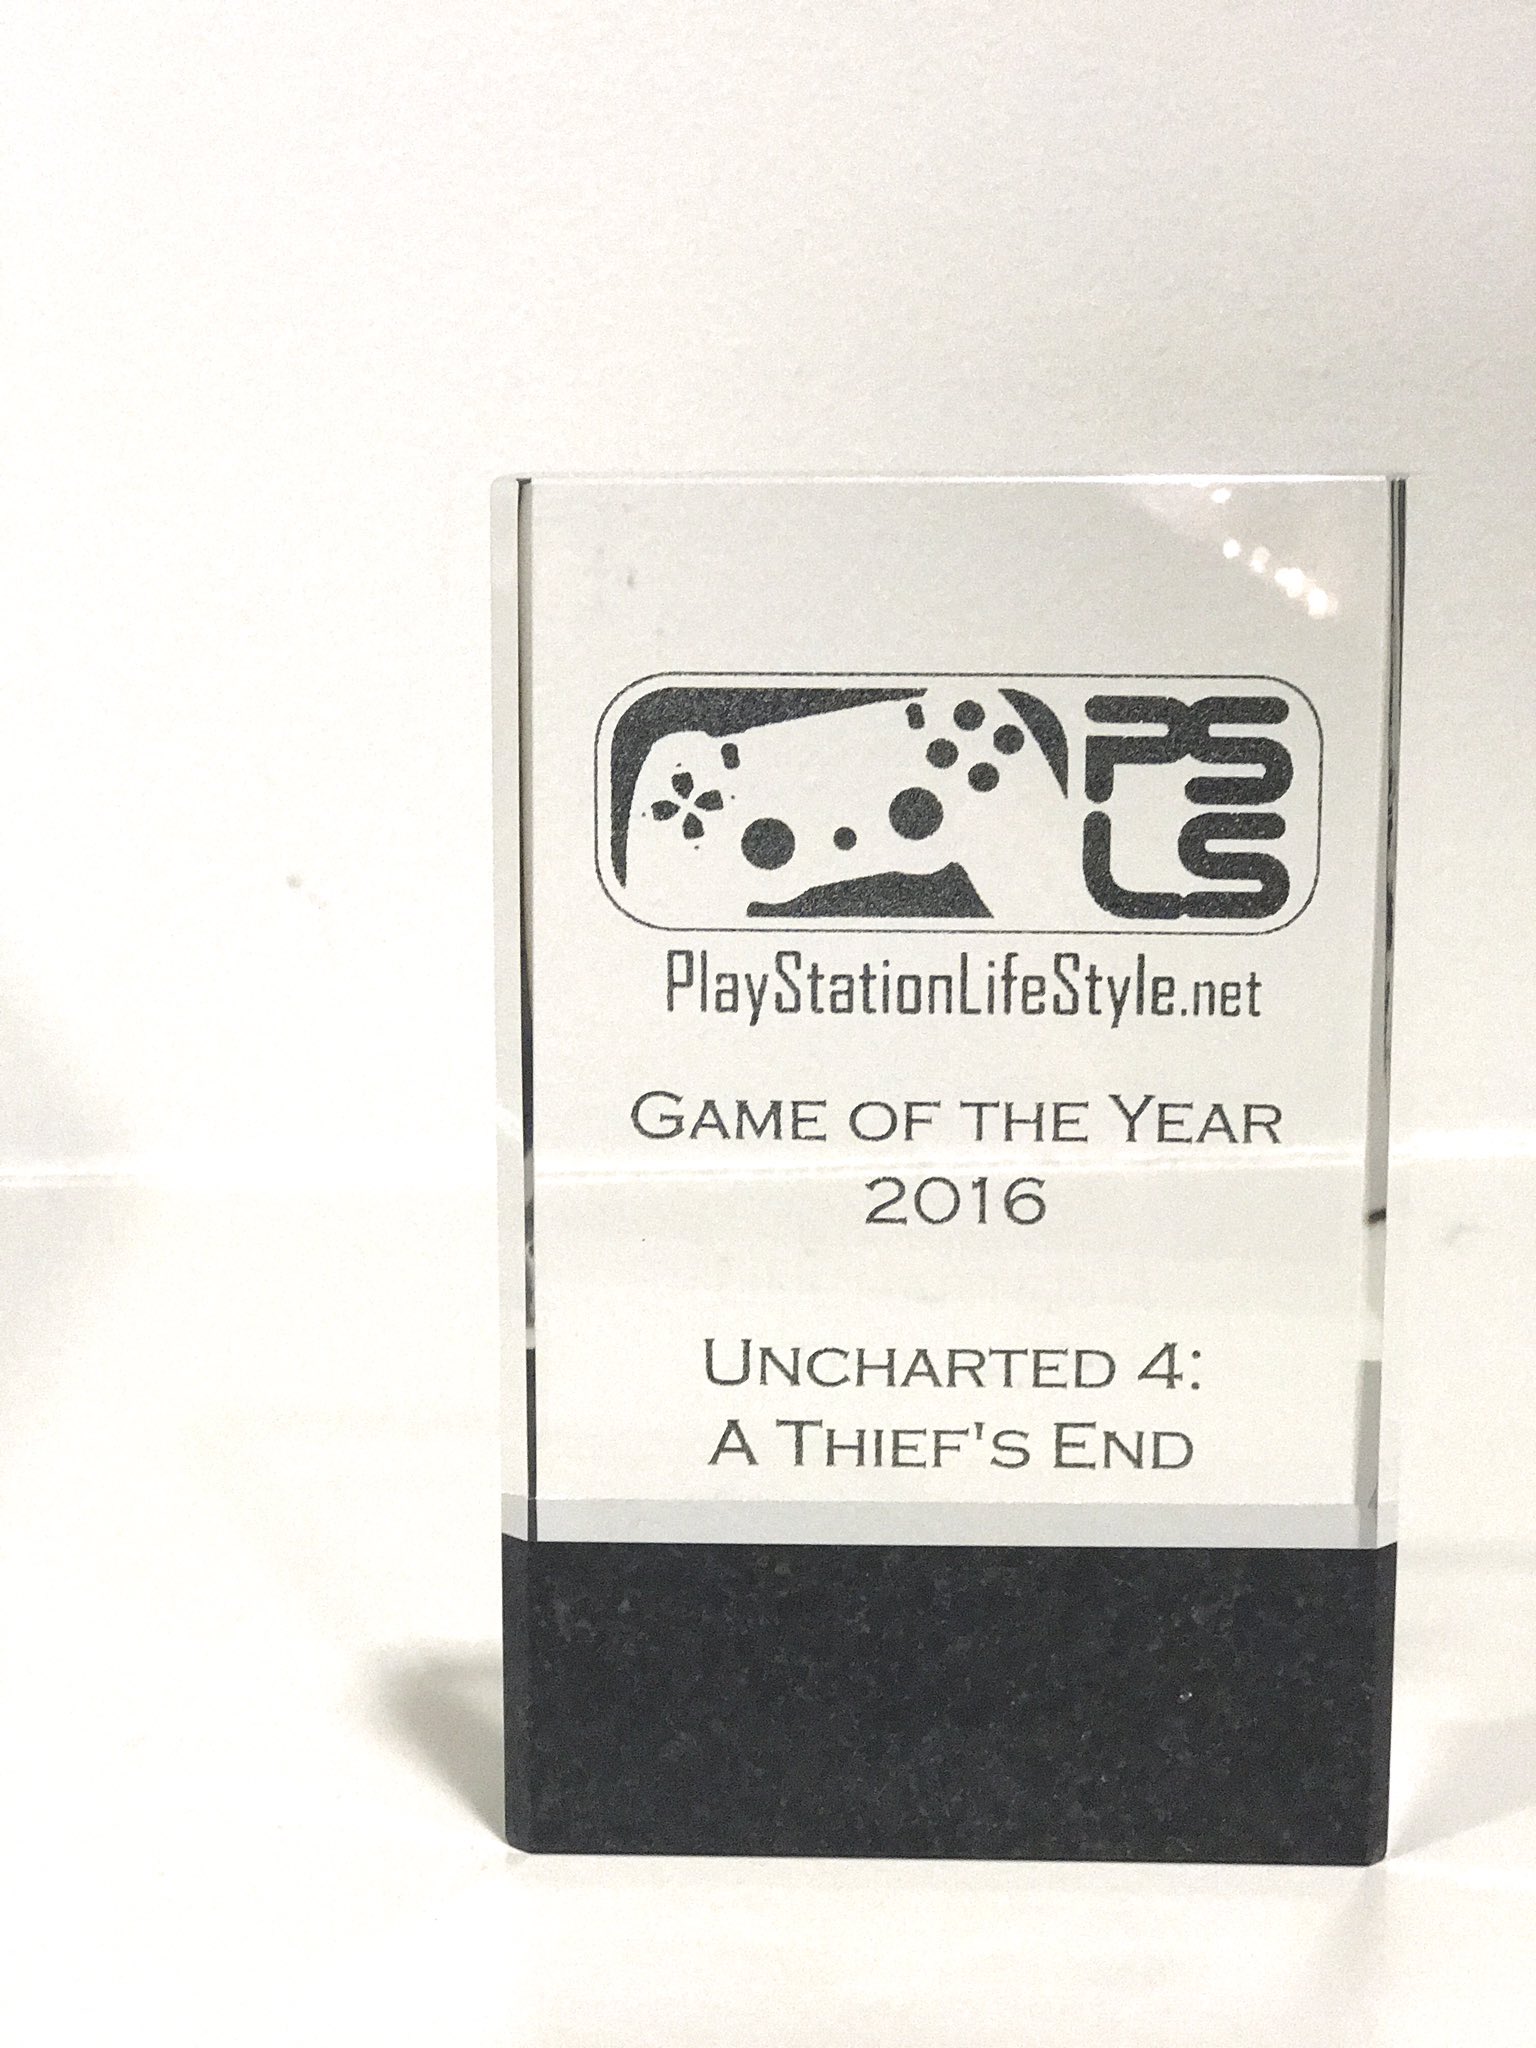 PlayStation LifeStyle PS4 Game of the Year 2016 Winner!